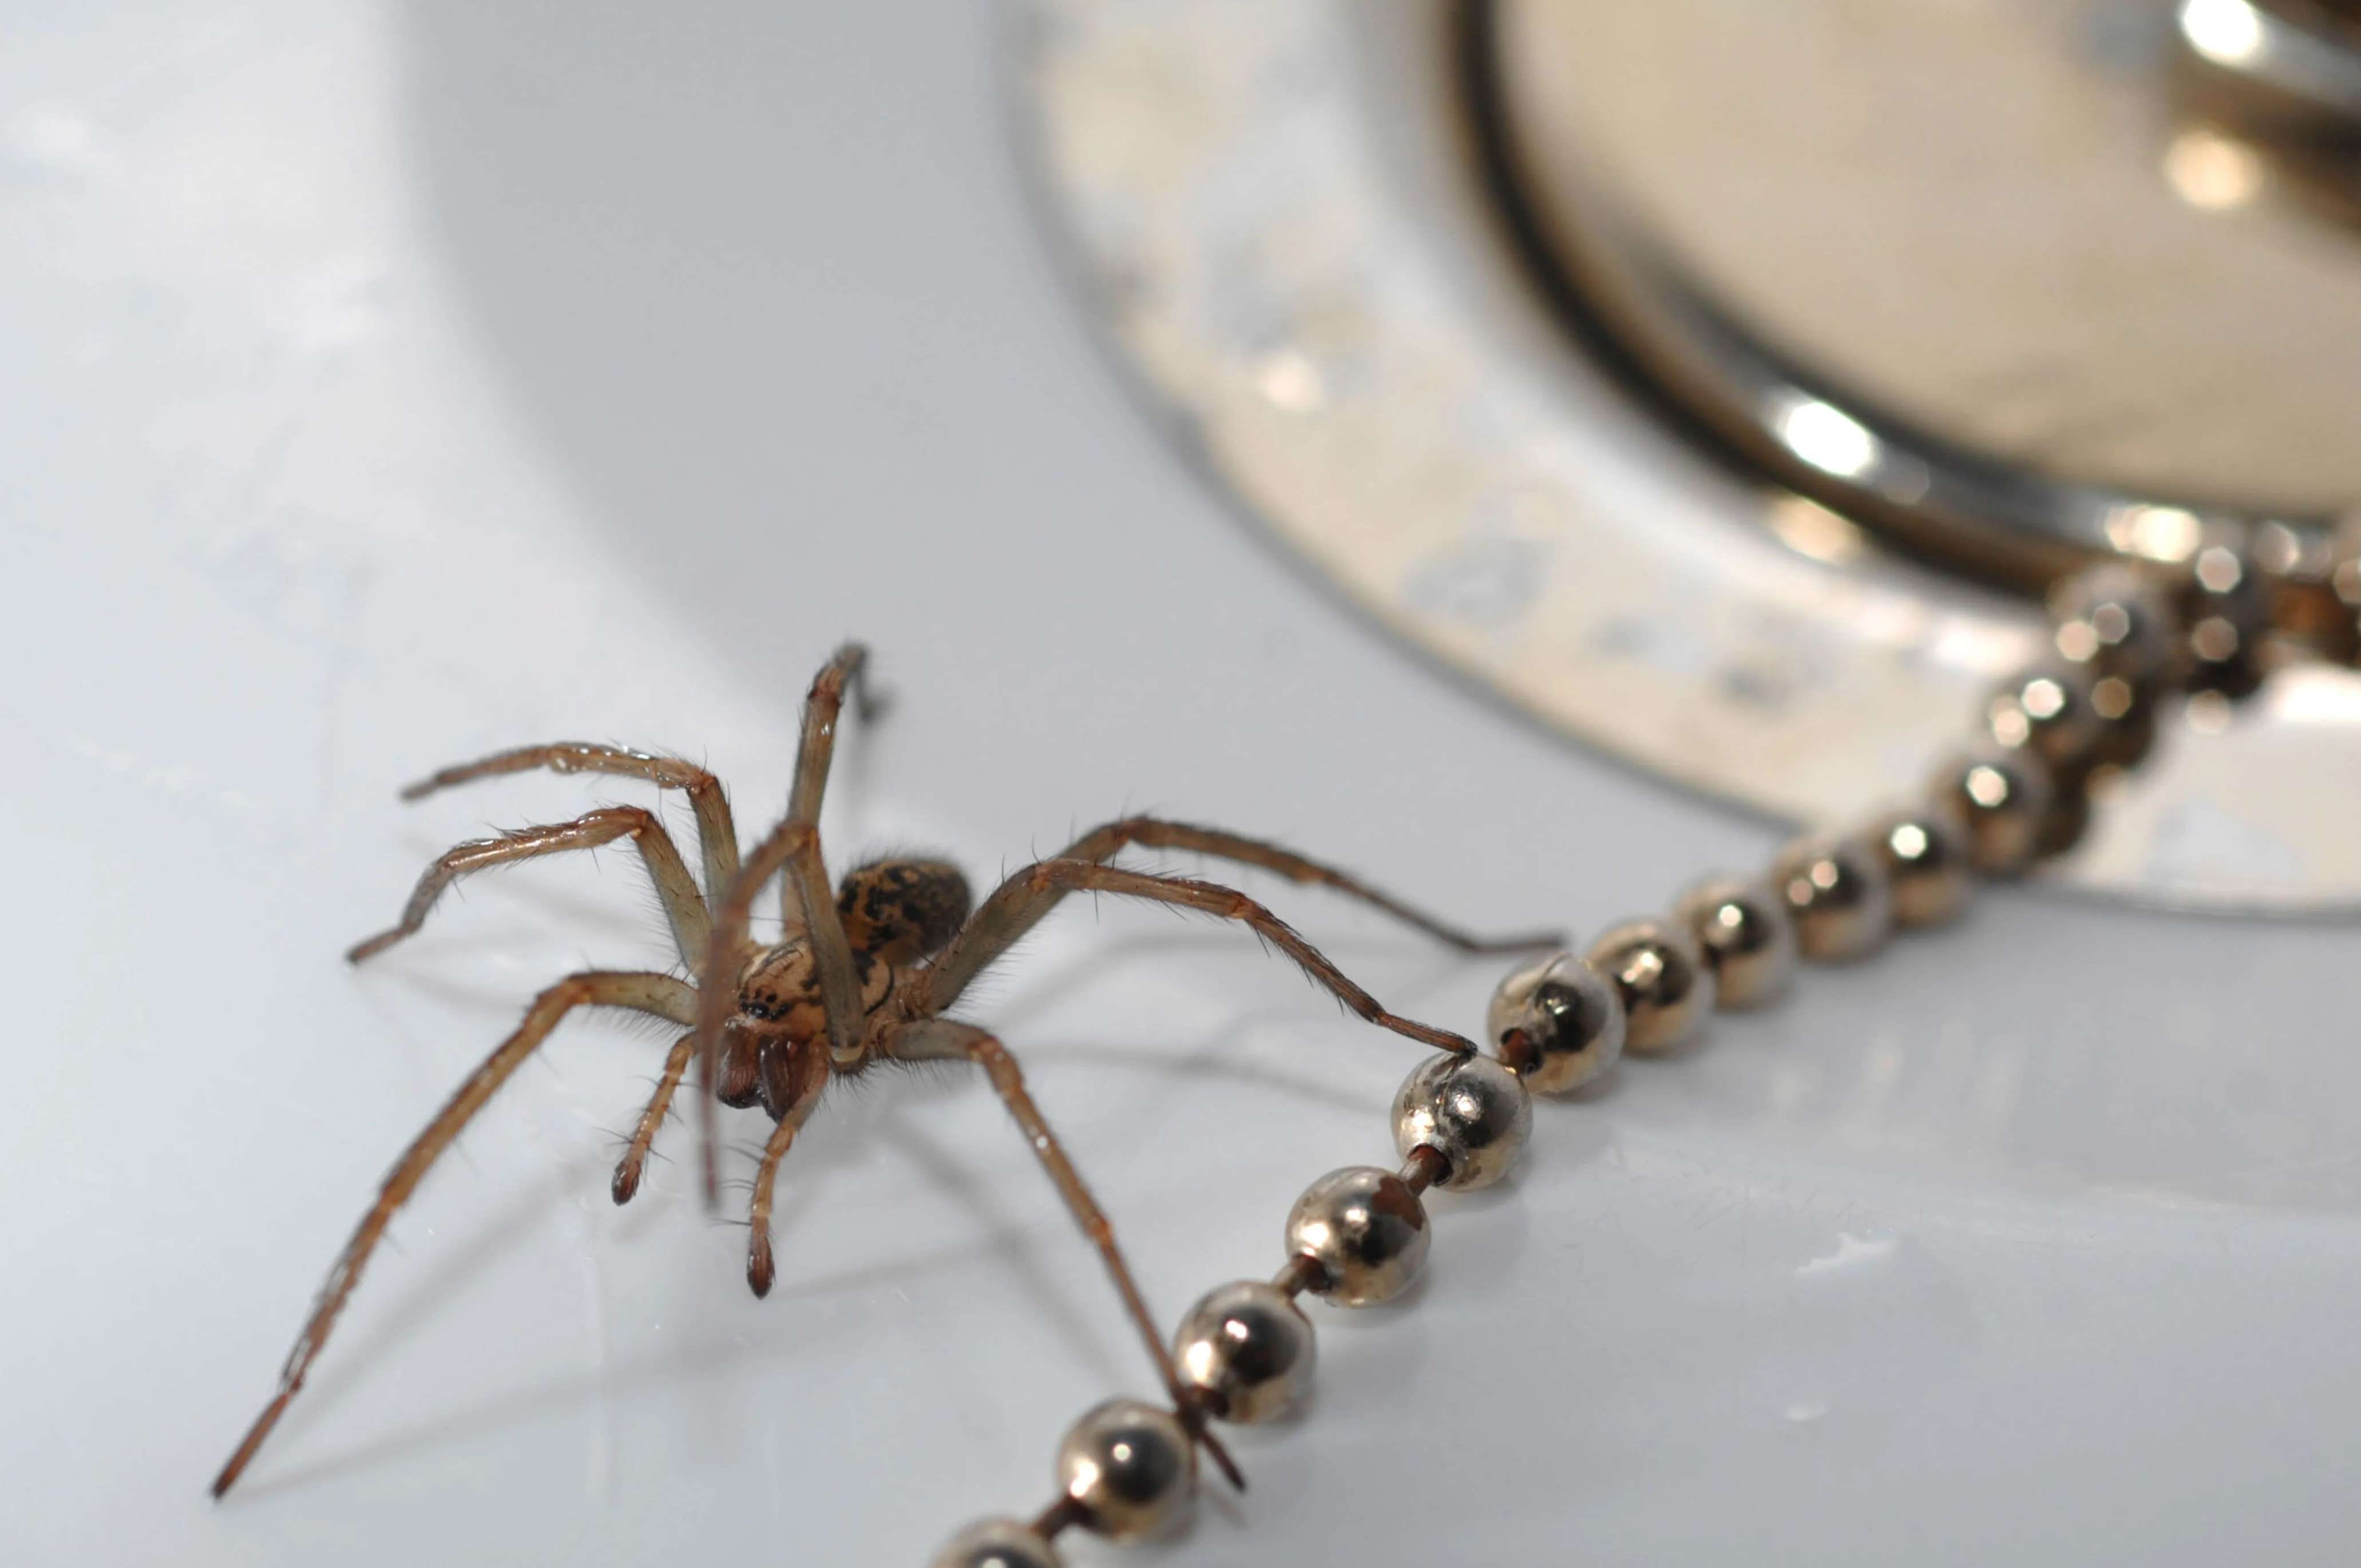 Say Goodbye To Spiders In Your Home – Effective And Pet-Friendly Solutions!